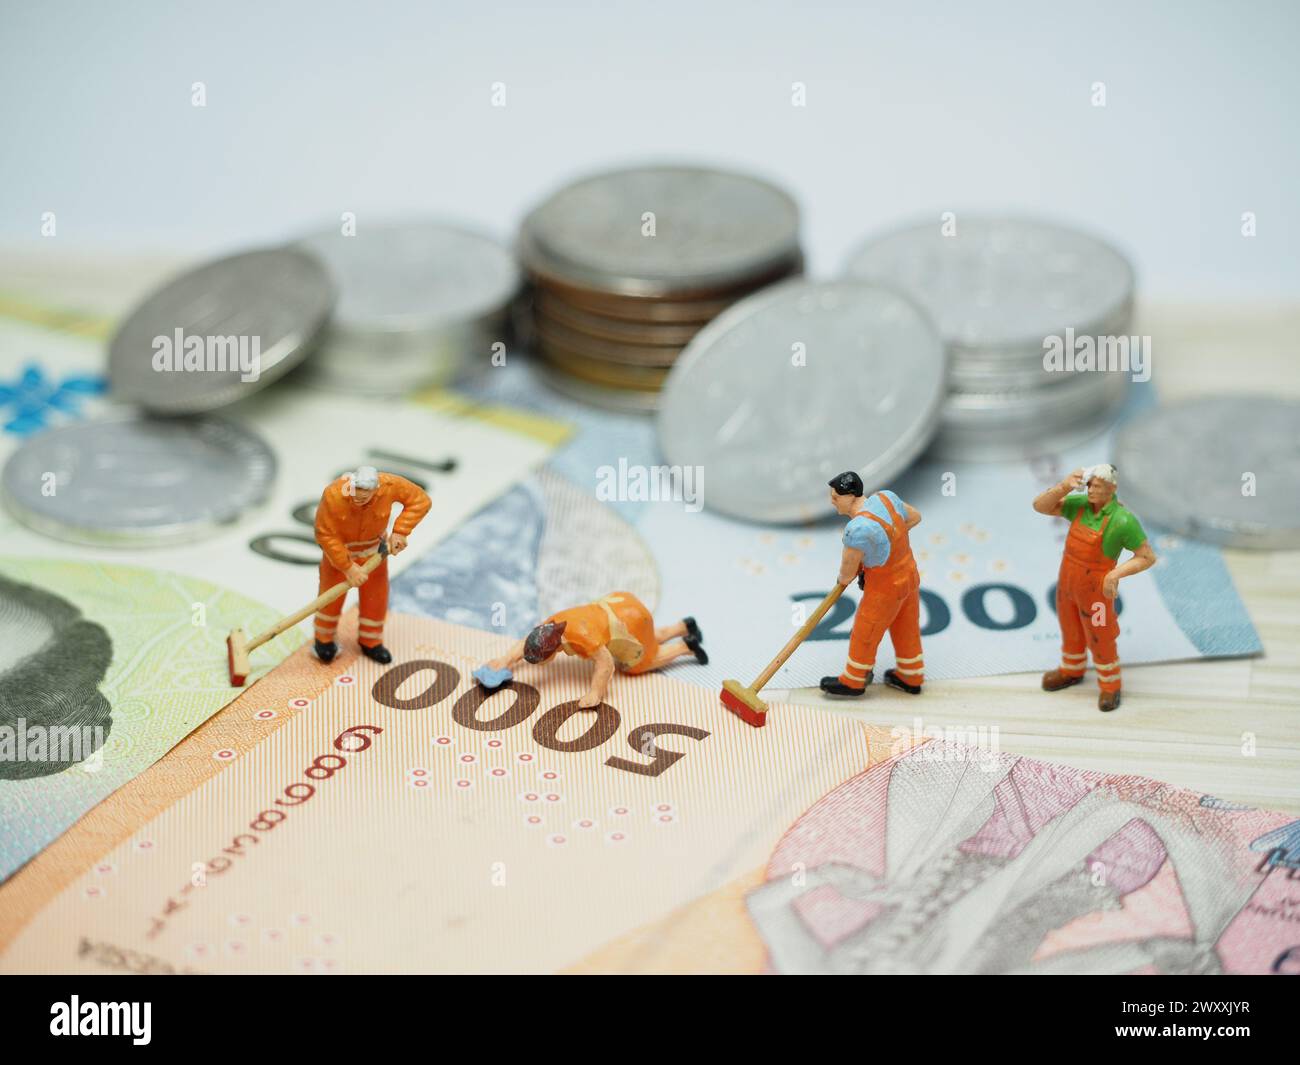 Miniature toy and unfocus money at table with blurred background. Money laundry conceptual design. Stock Photo